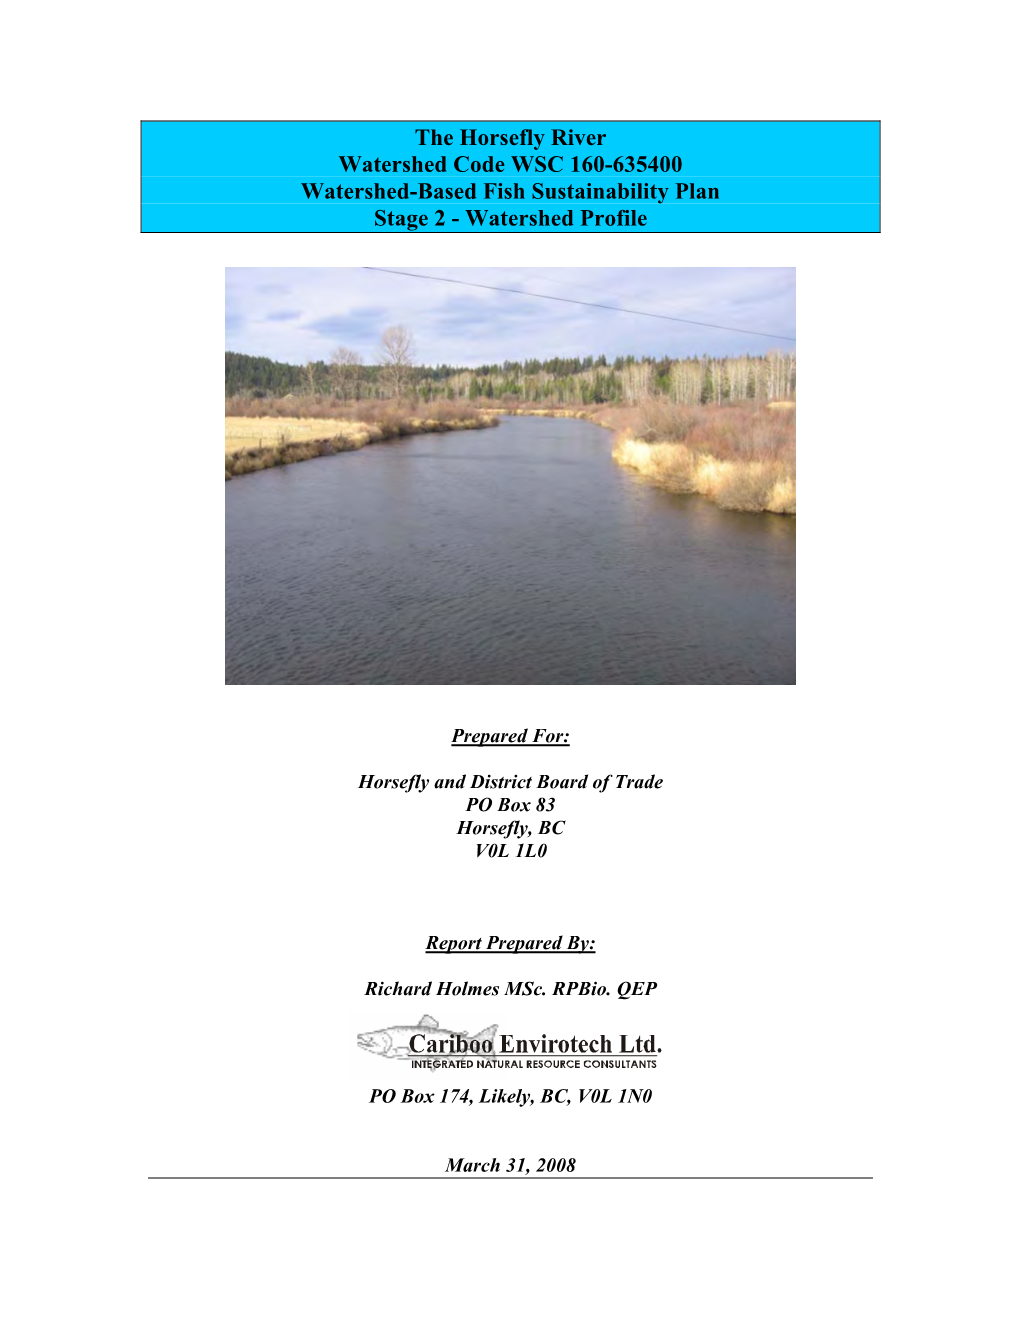 Horsefly River Roundtable Process and for the Provision of Funding for This Project